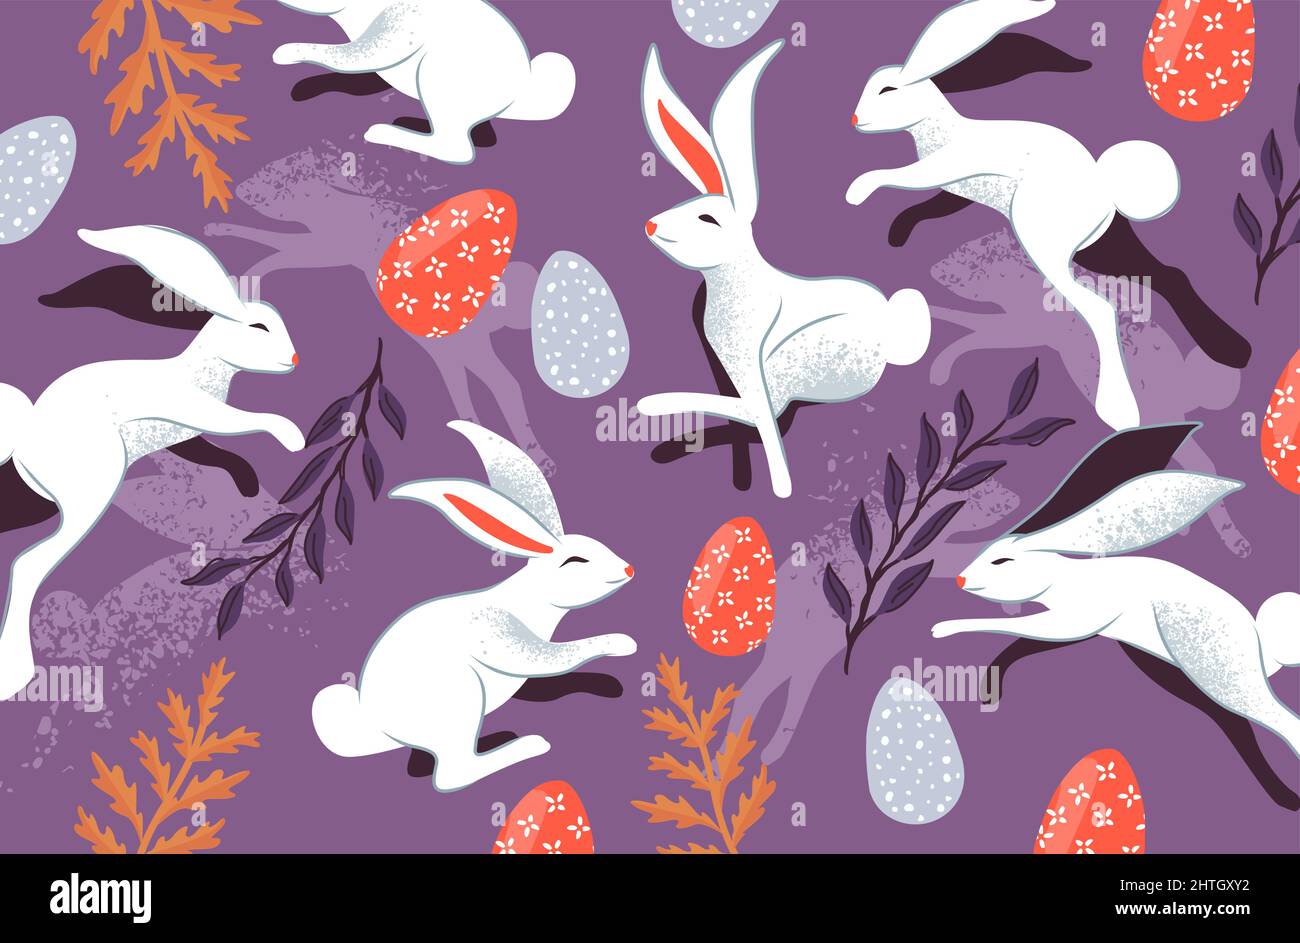 Rabbits jumping with easter eggs and decorations. Easter spring time vector illustration. Stock Vector